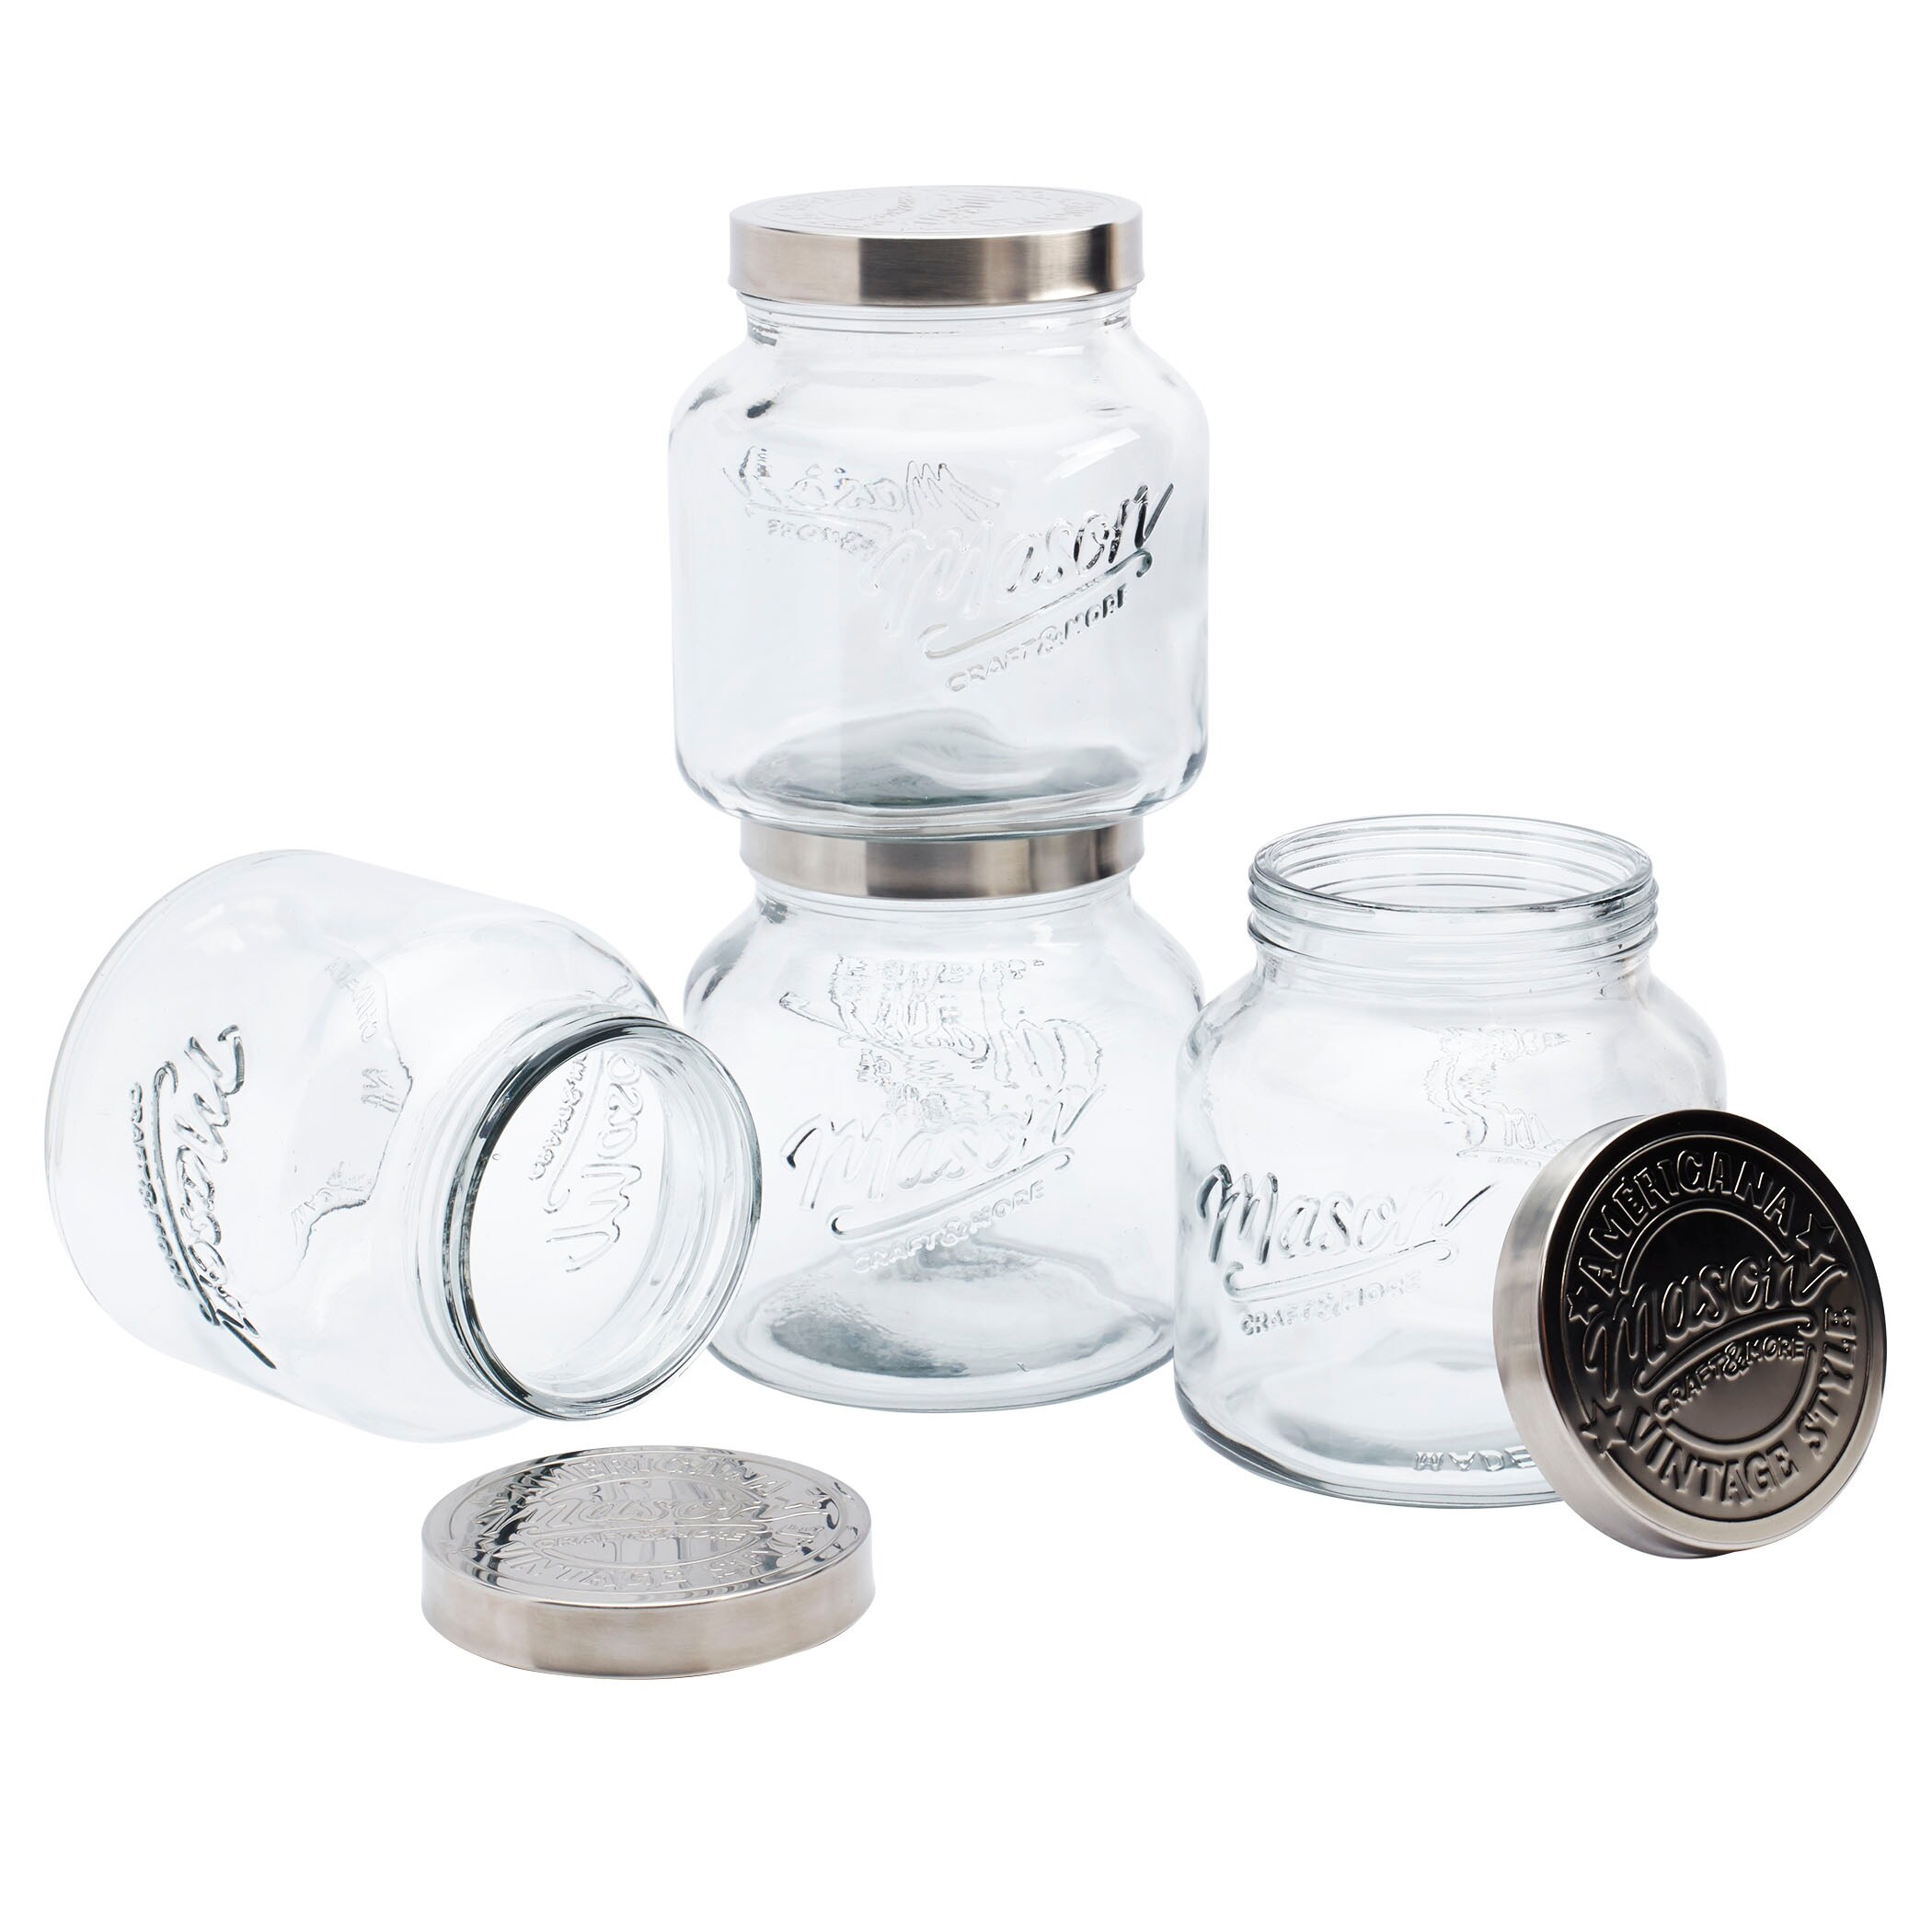 Mason Craft and More 2L Preserving Jars with Clamp Lids - Set of 2